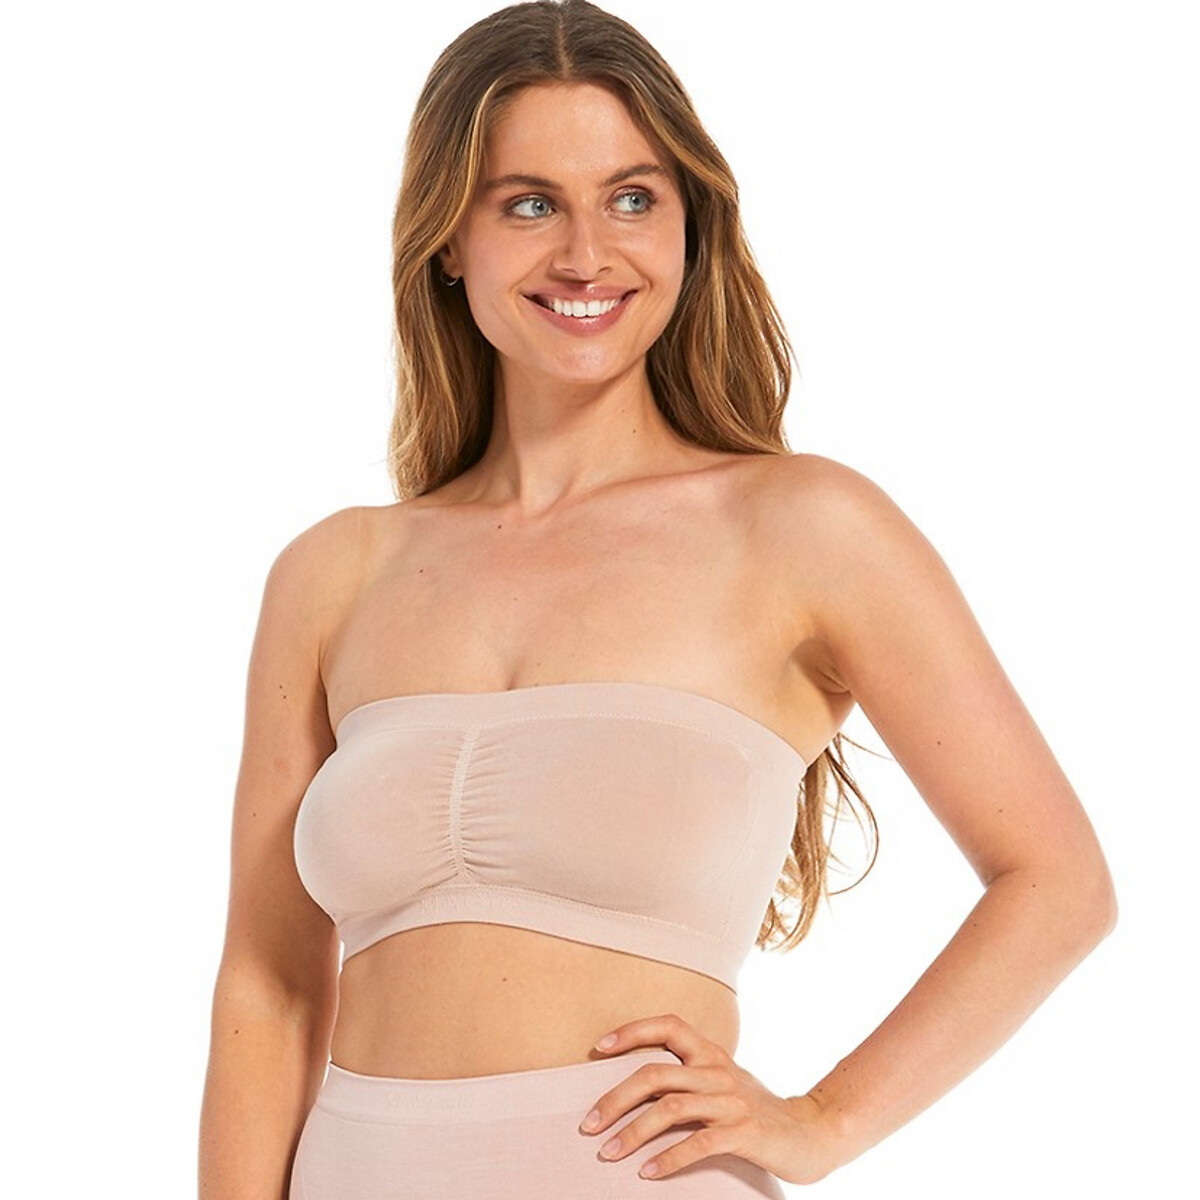 Bamboo Mix Bandeau Bra with Push-Up Effect